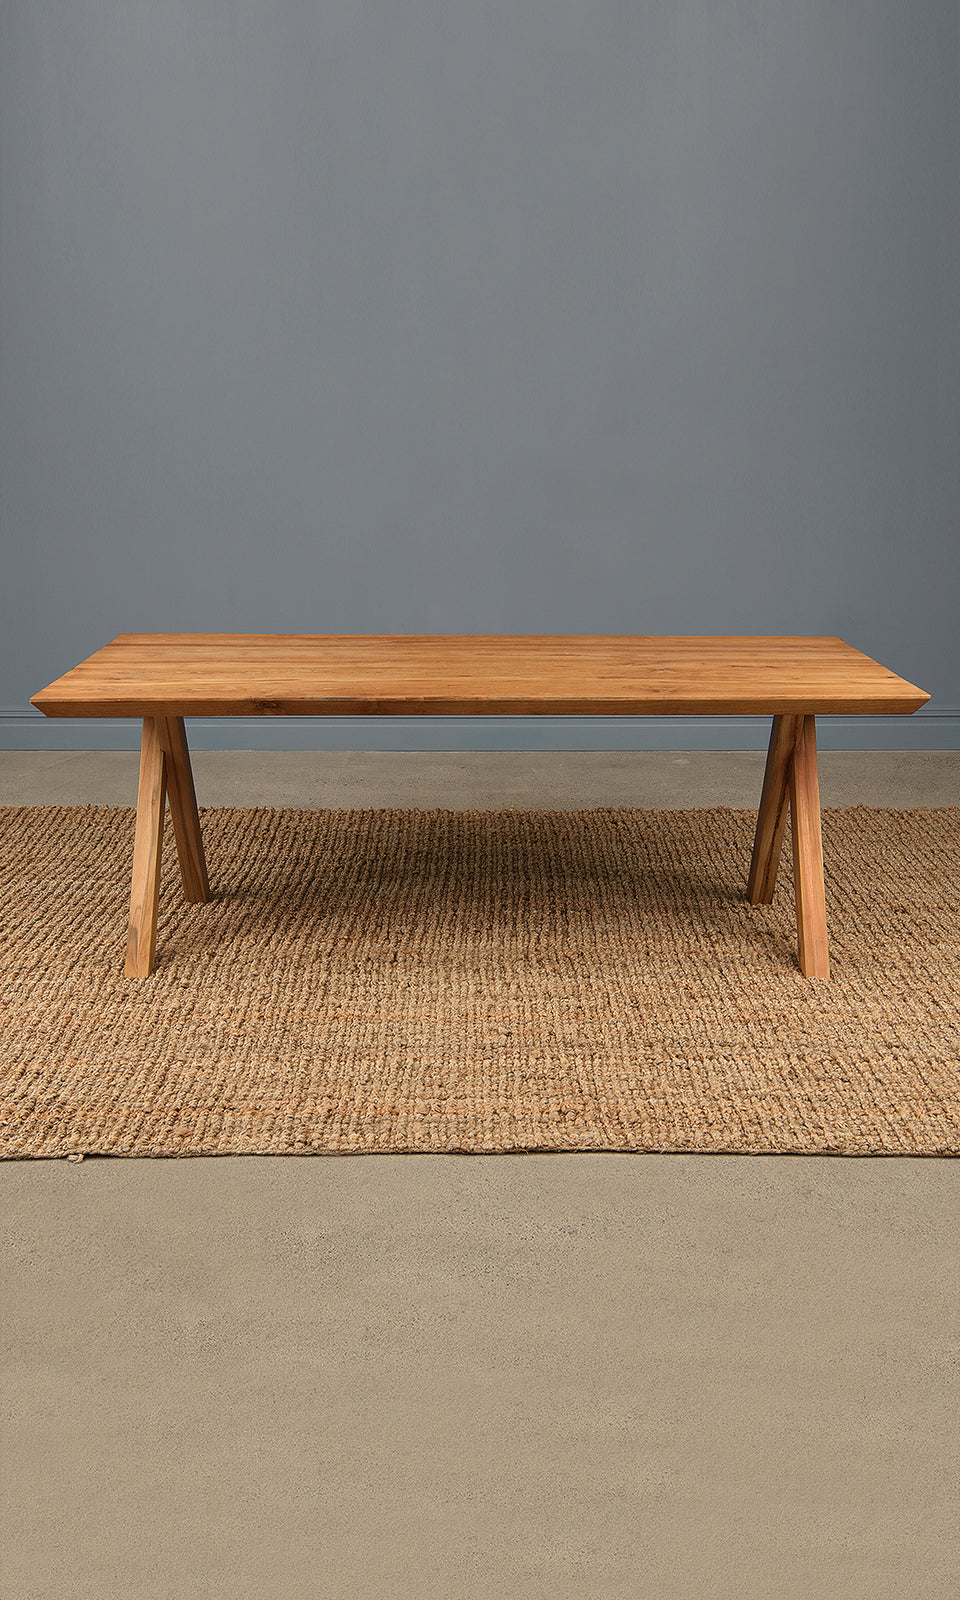 Bayan Teak Dining Table with X-shaped Legs